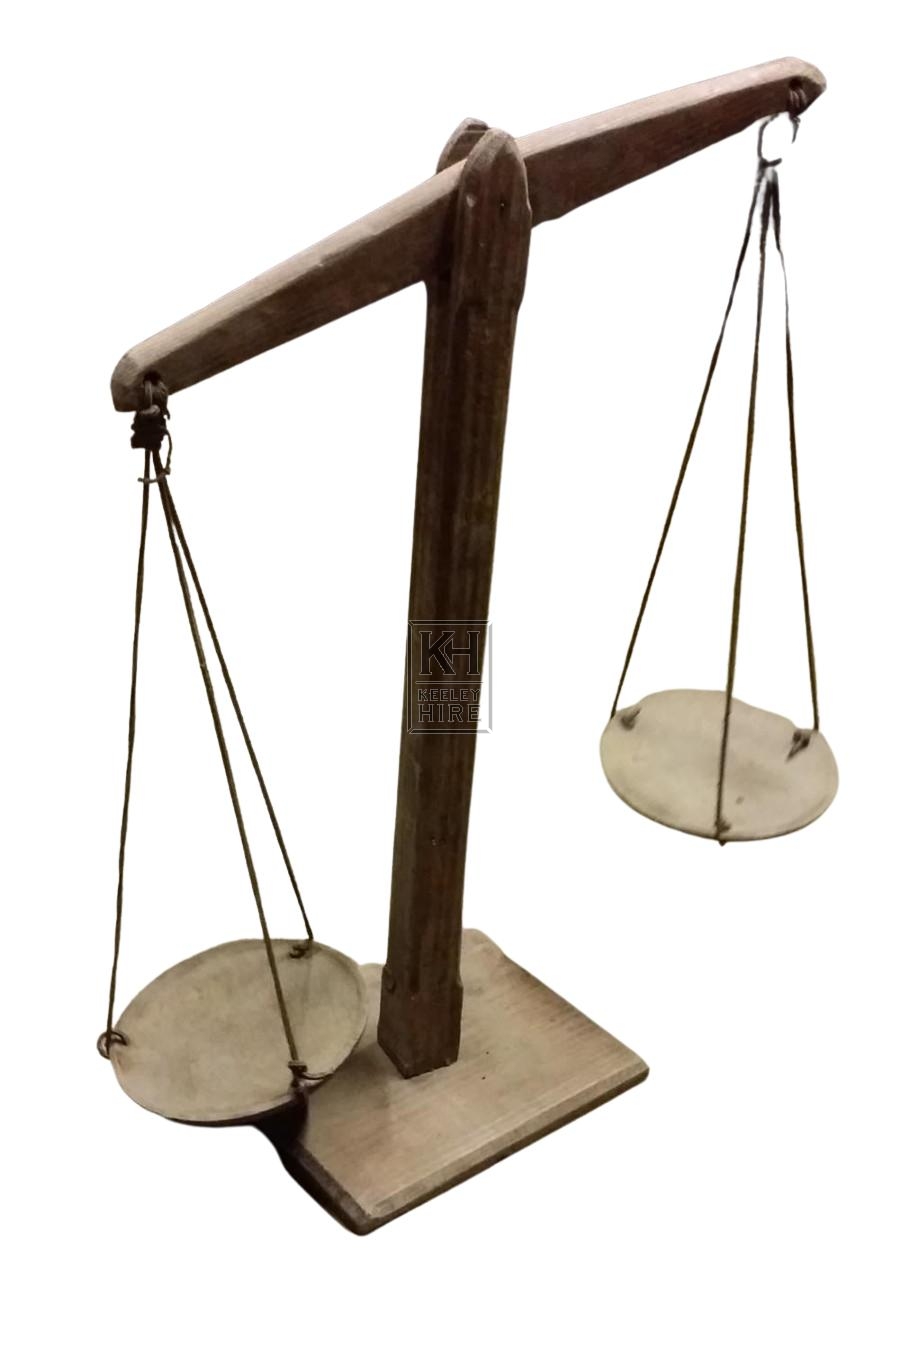 Wood early balance scales